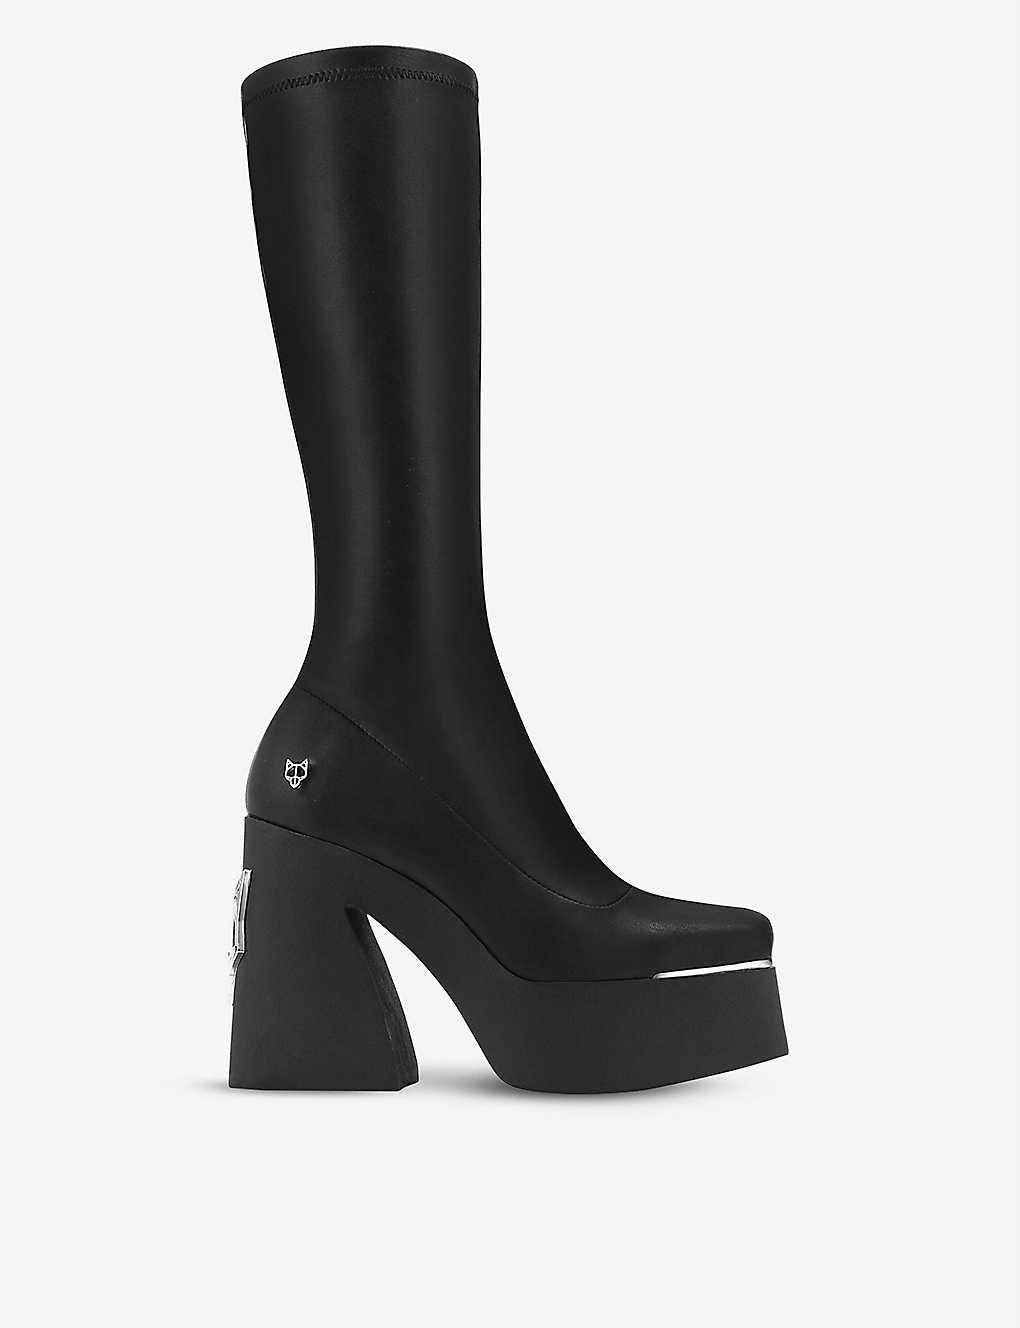 Naked Wolfe Impact Knee-length Platform Boots in Black | Lyst